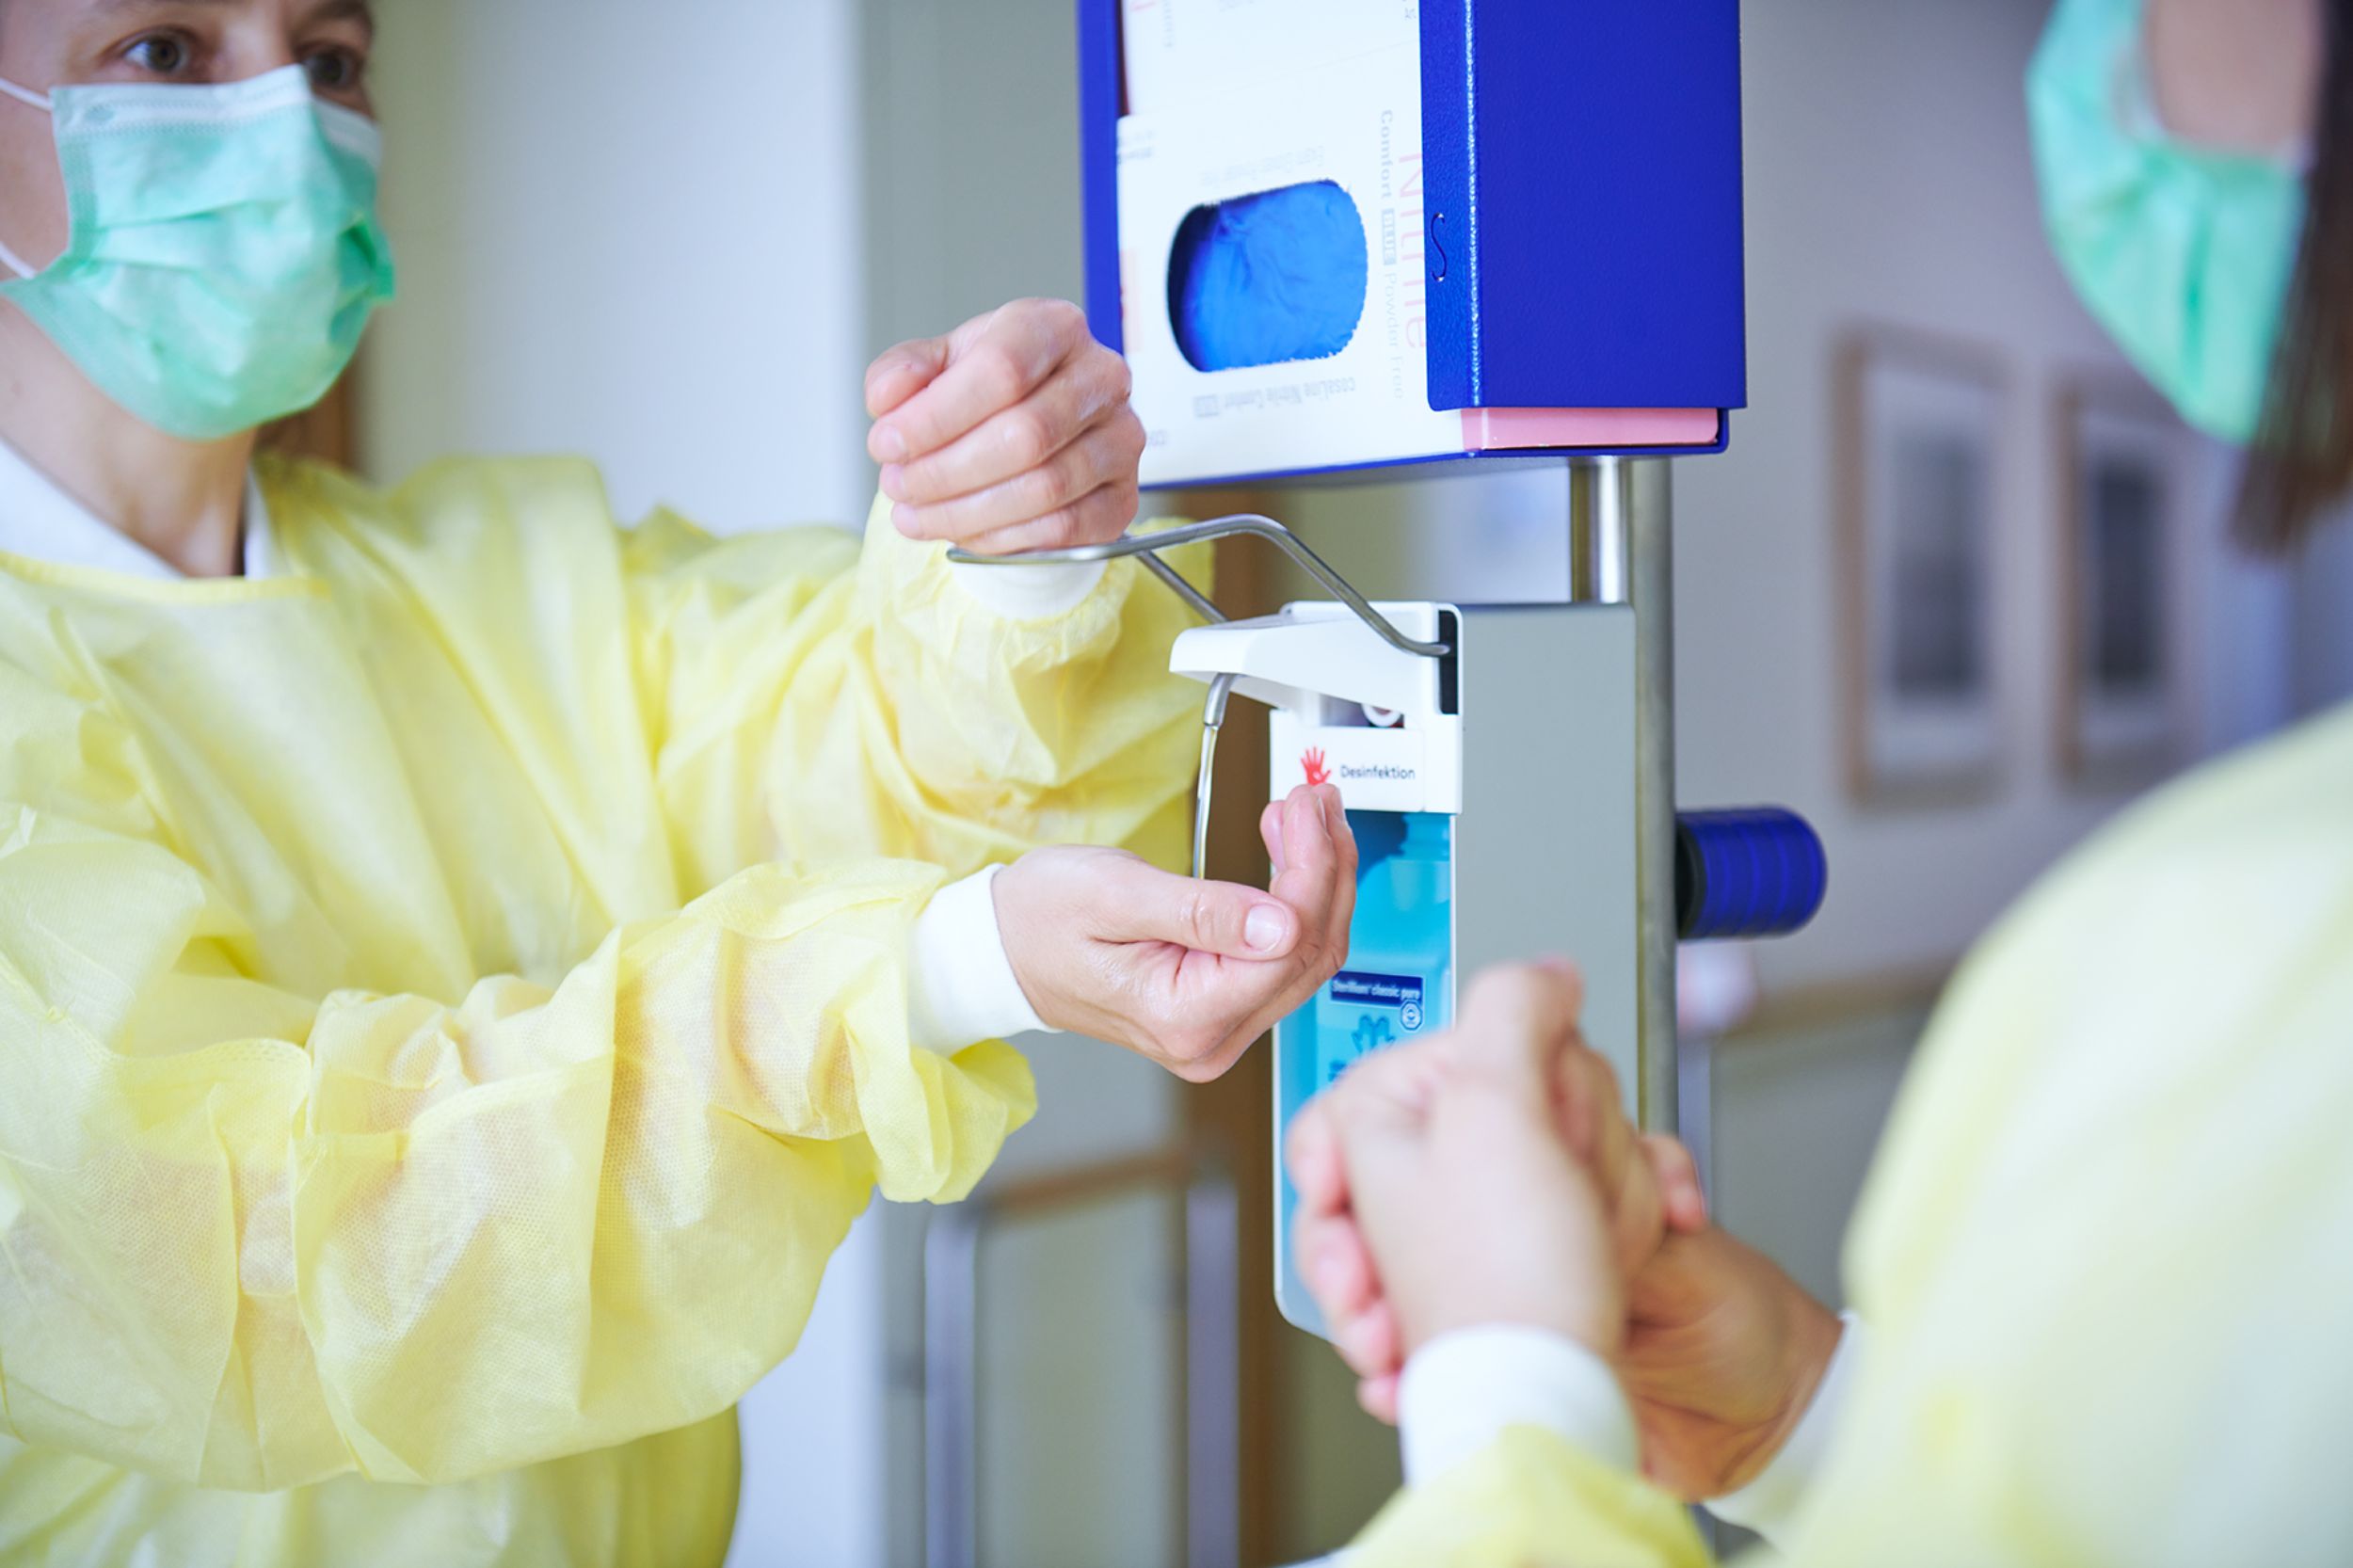 Two hospital hygiene staff disinfecting hands